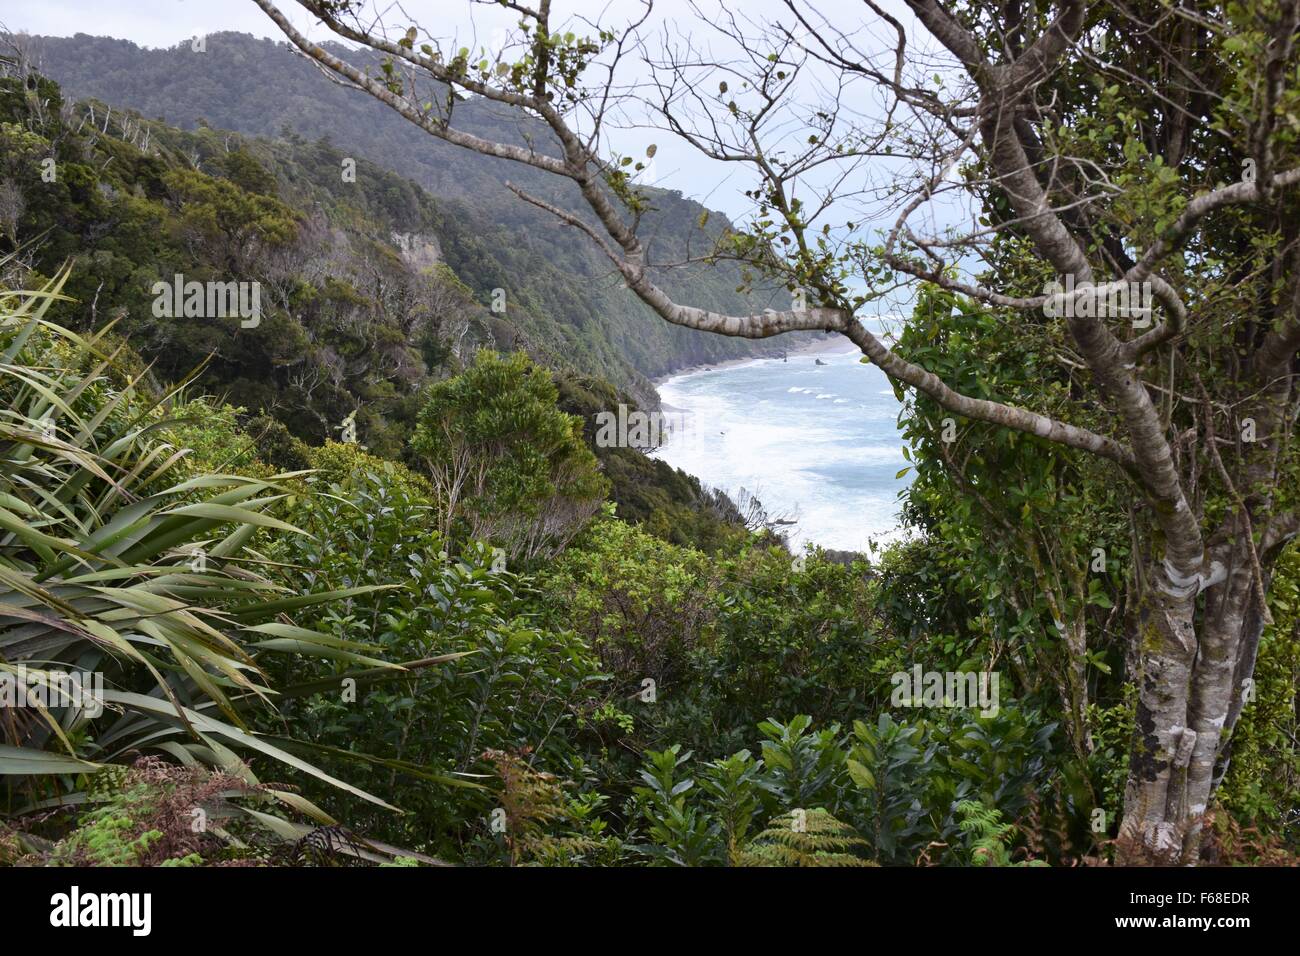 Lush green trees, plants and foliage on the west coast of New Zealand Stock Photo